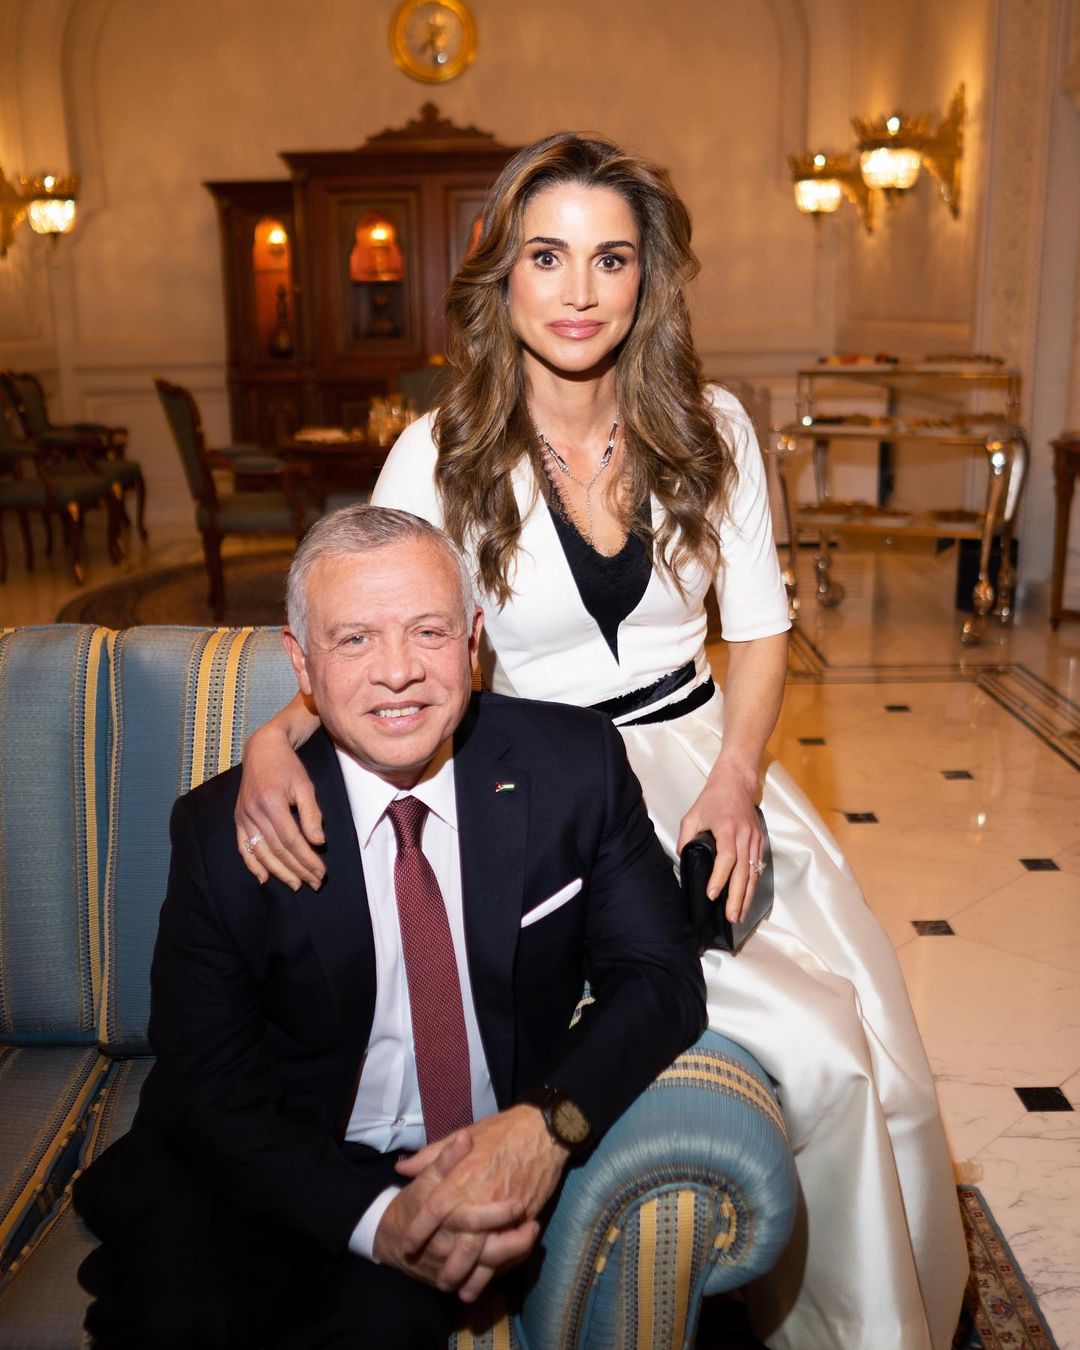 Rania ended the day with sharing a beautiful picture with her husband King Abdullah on Instagram. She wrote, "Love doing life with you